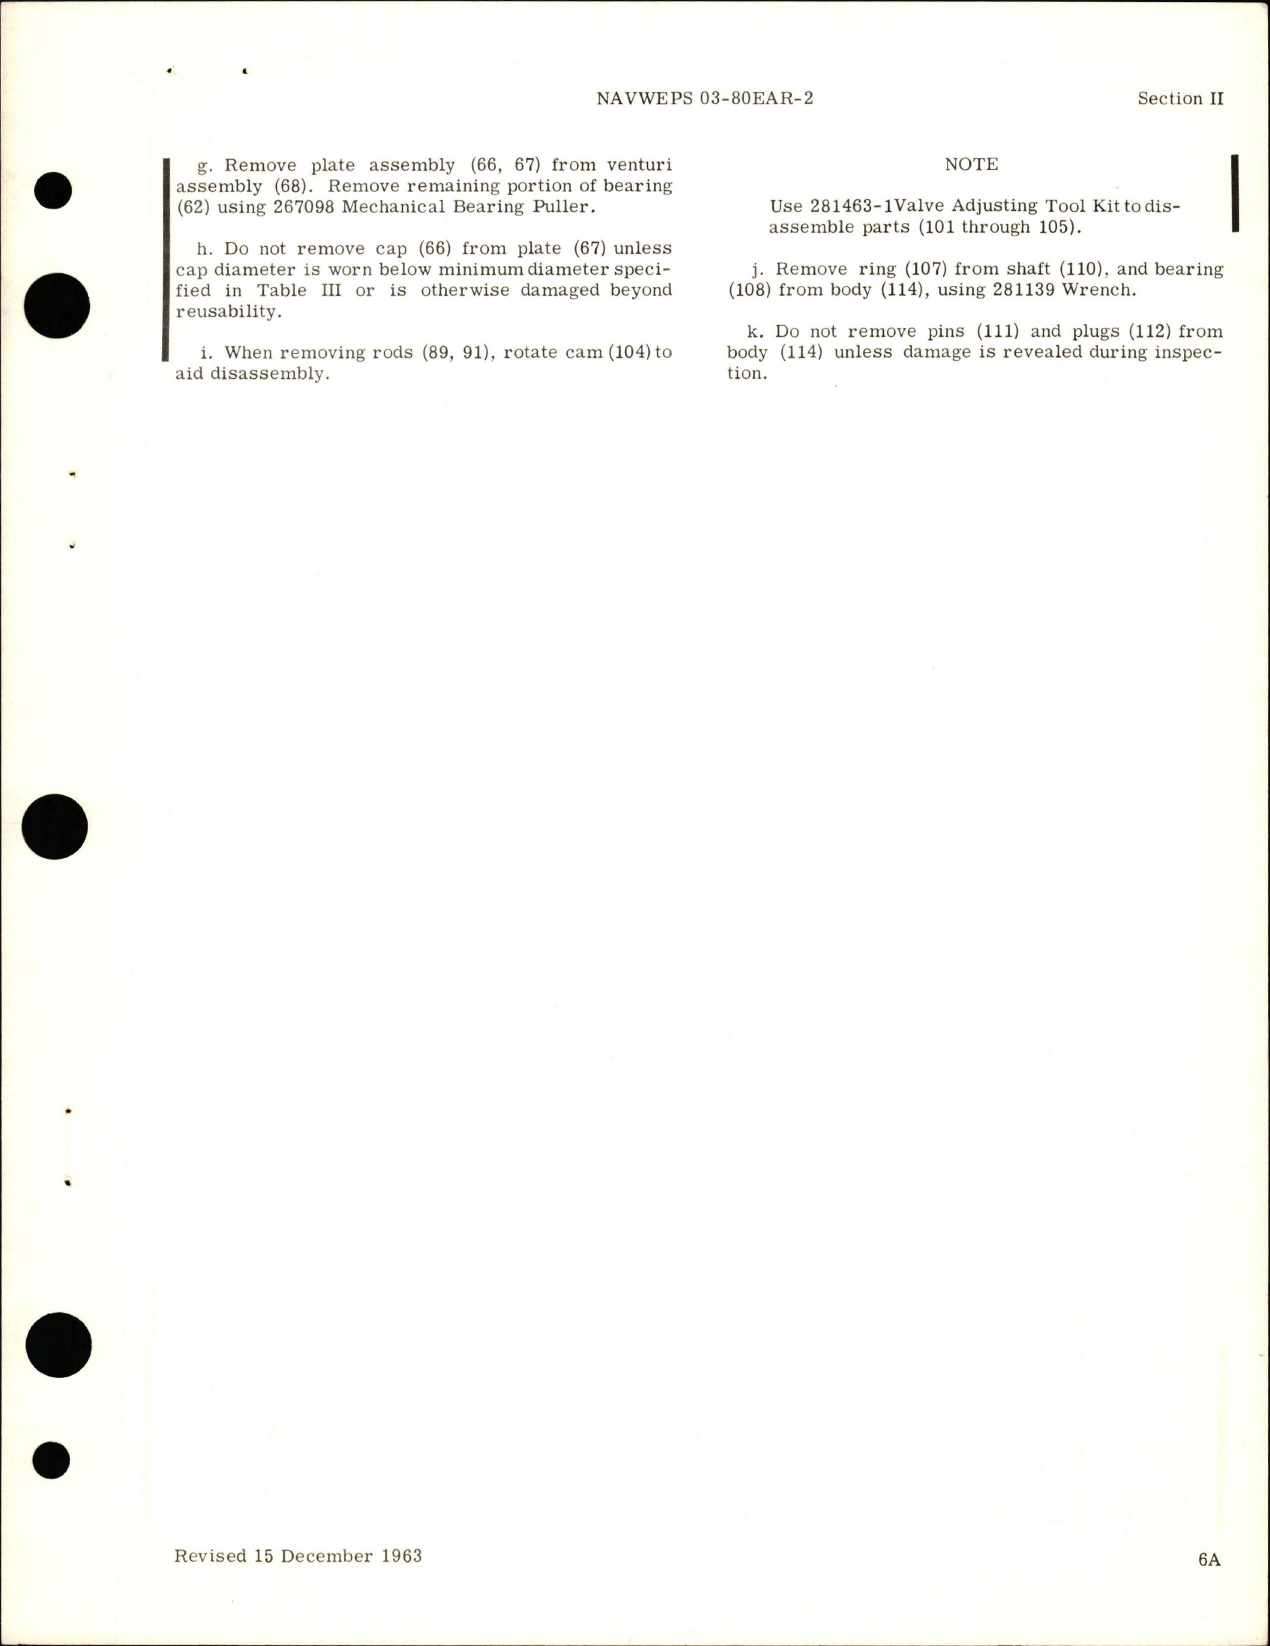 Sample page 7 from AirCorps Library document: Overhaul Instructions for Two and One-Half Inch Diameter Shutoff Airflow Regulator - Part 106616, 106616-1-1